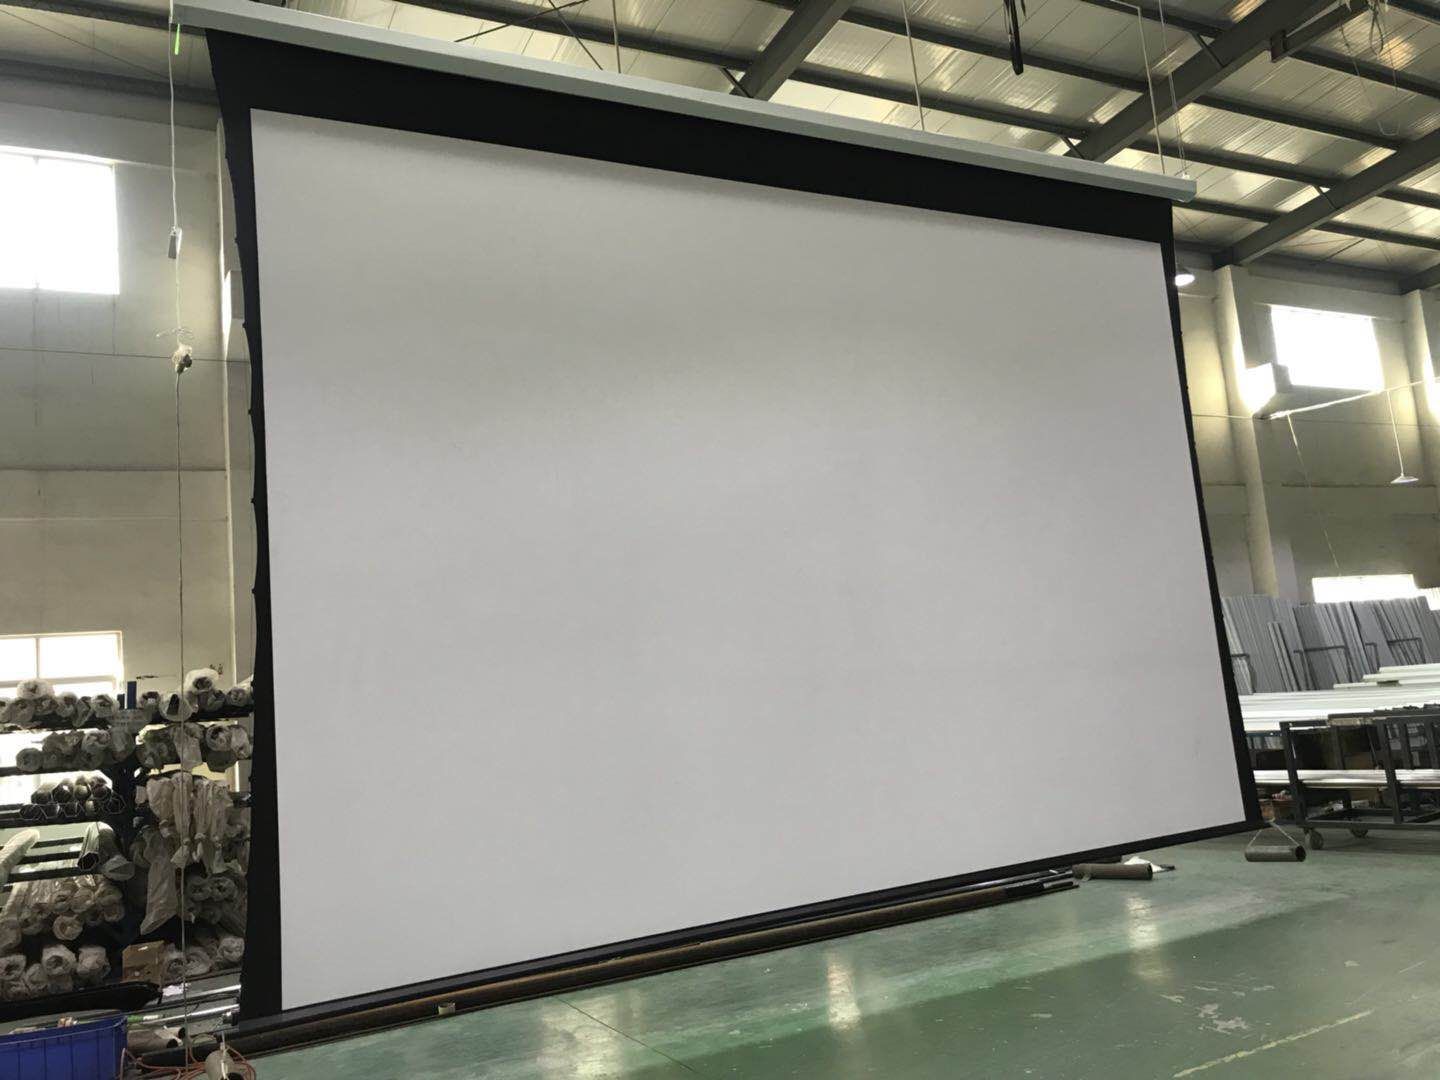  Screen Electric Projector Screen Wall Ceiling Mounted projection screen 